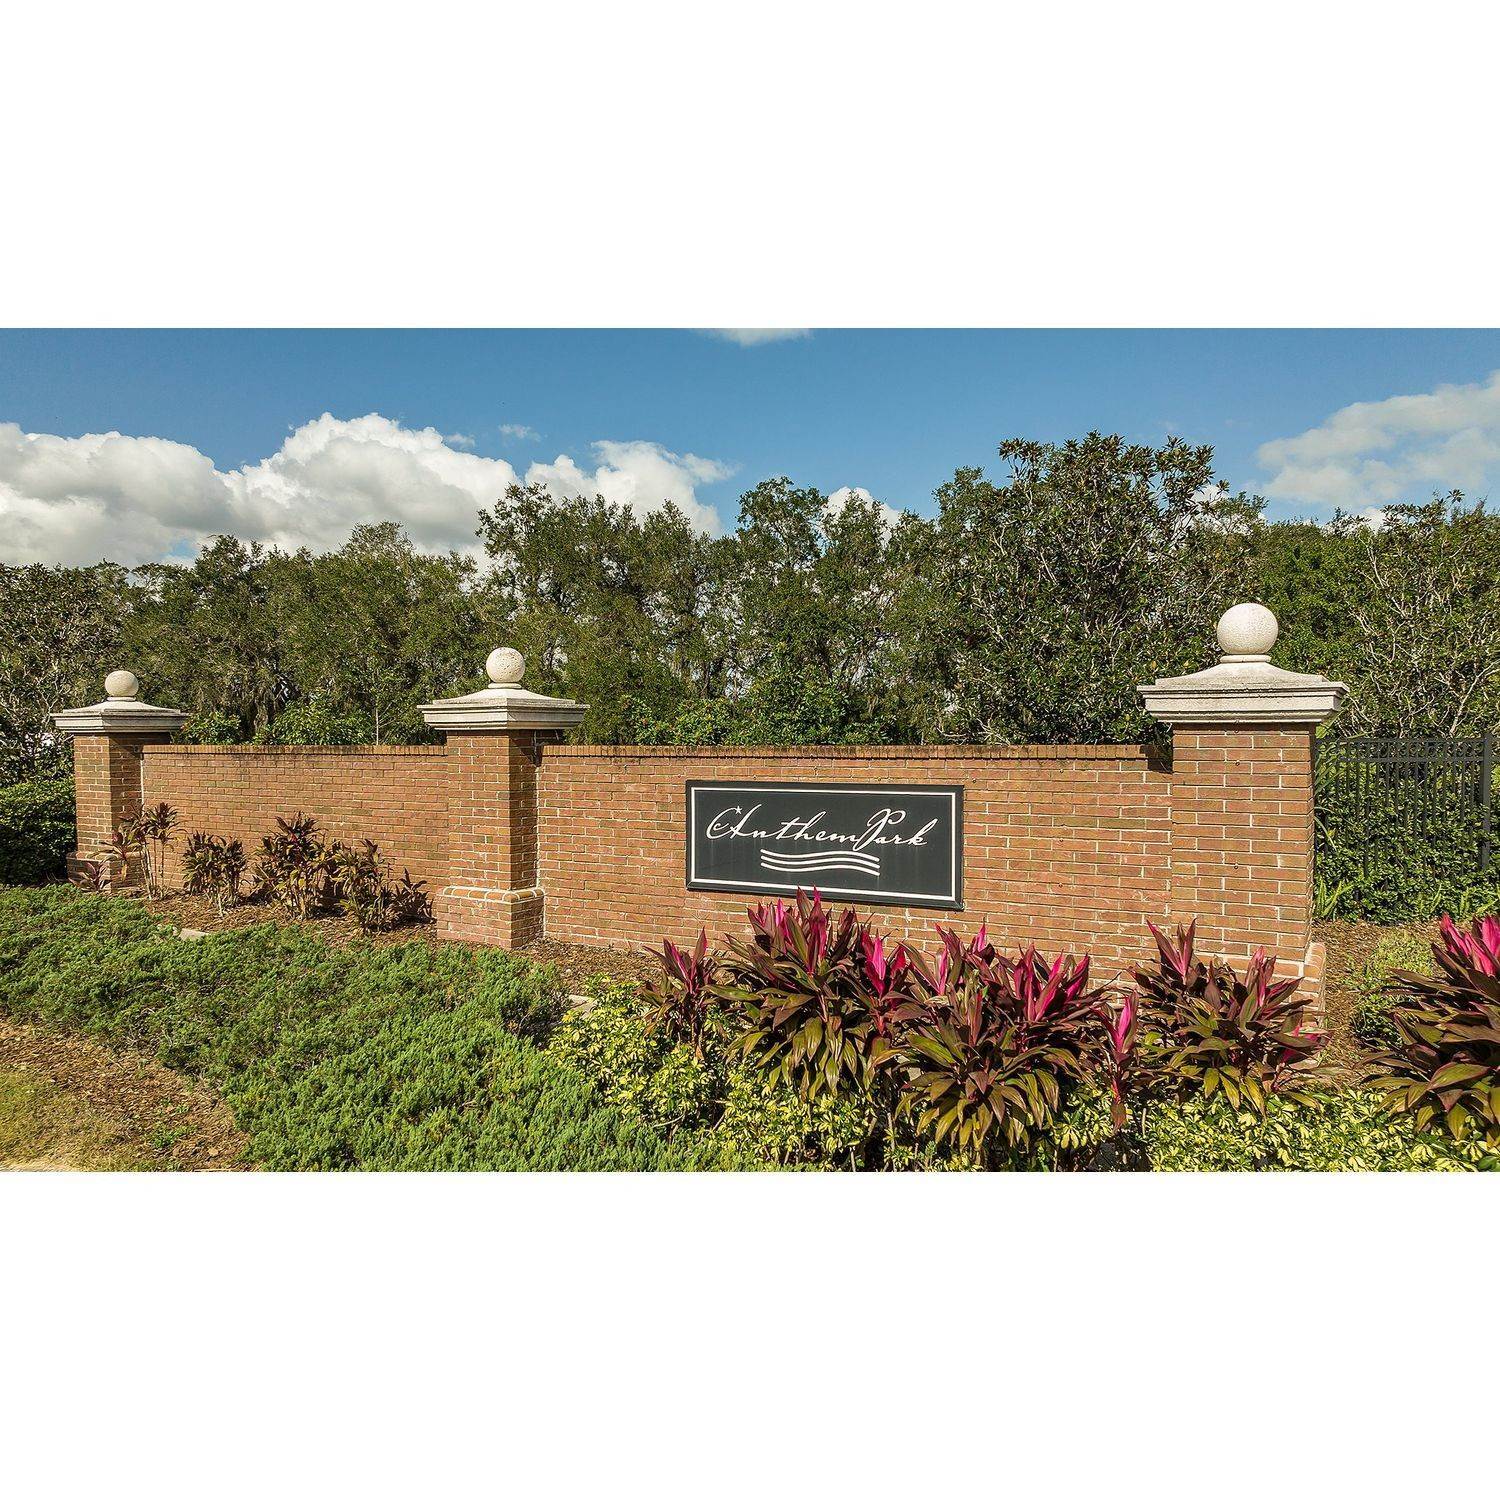 The Townhomes at Anthem Park xây dựng tại 4590 Calvary Way, St. Cloud, FL 34769